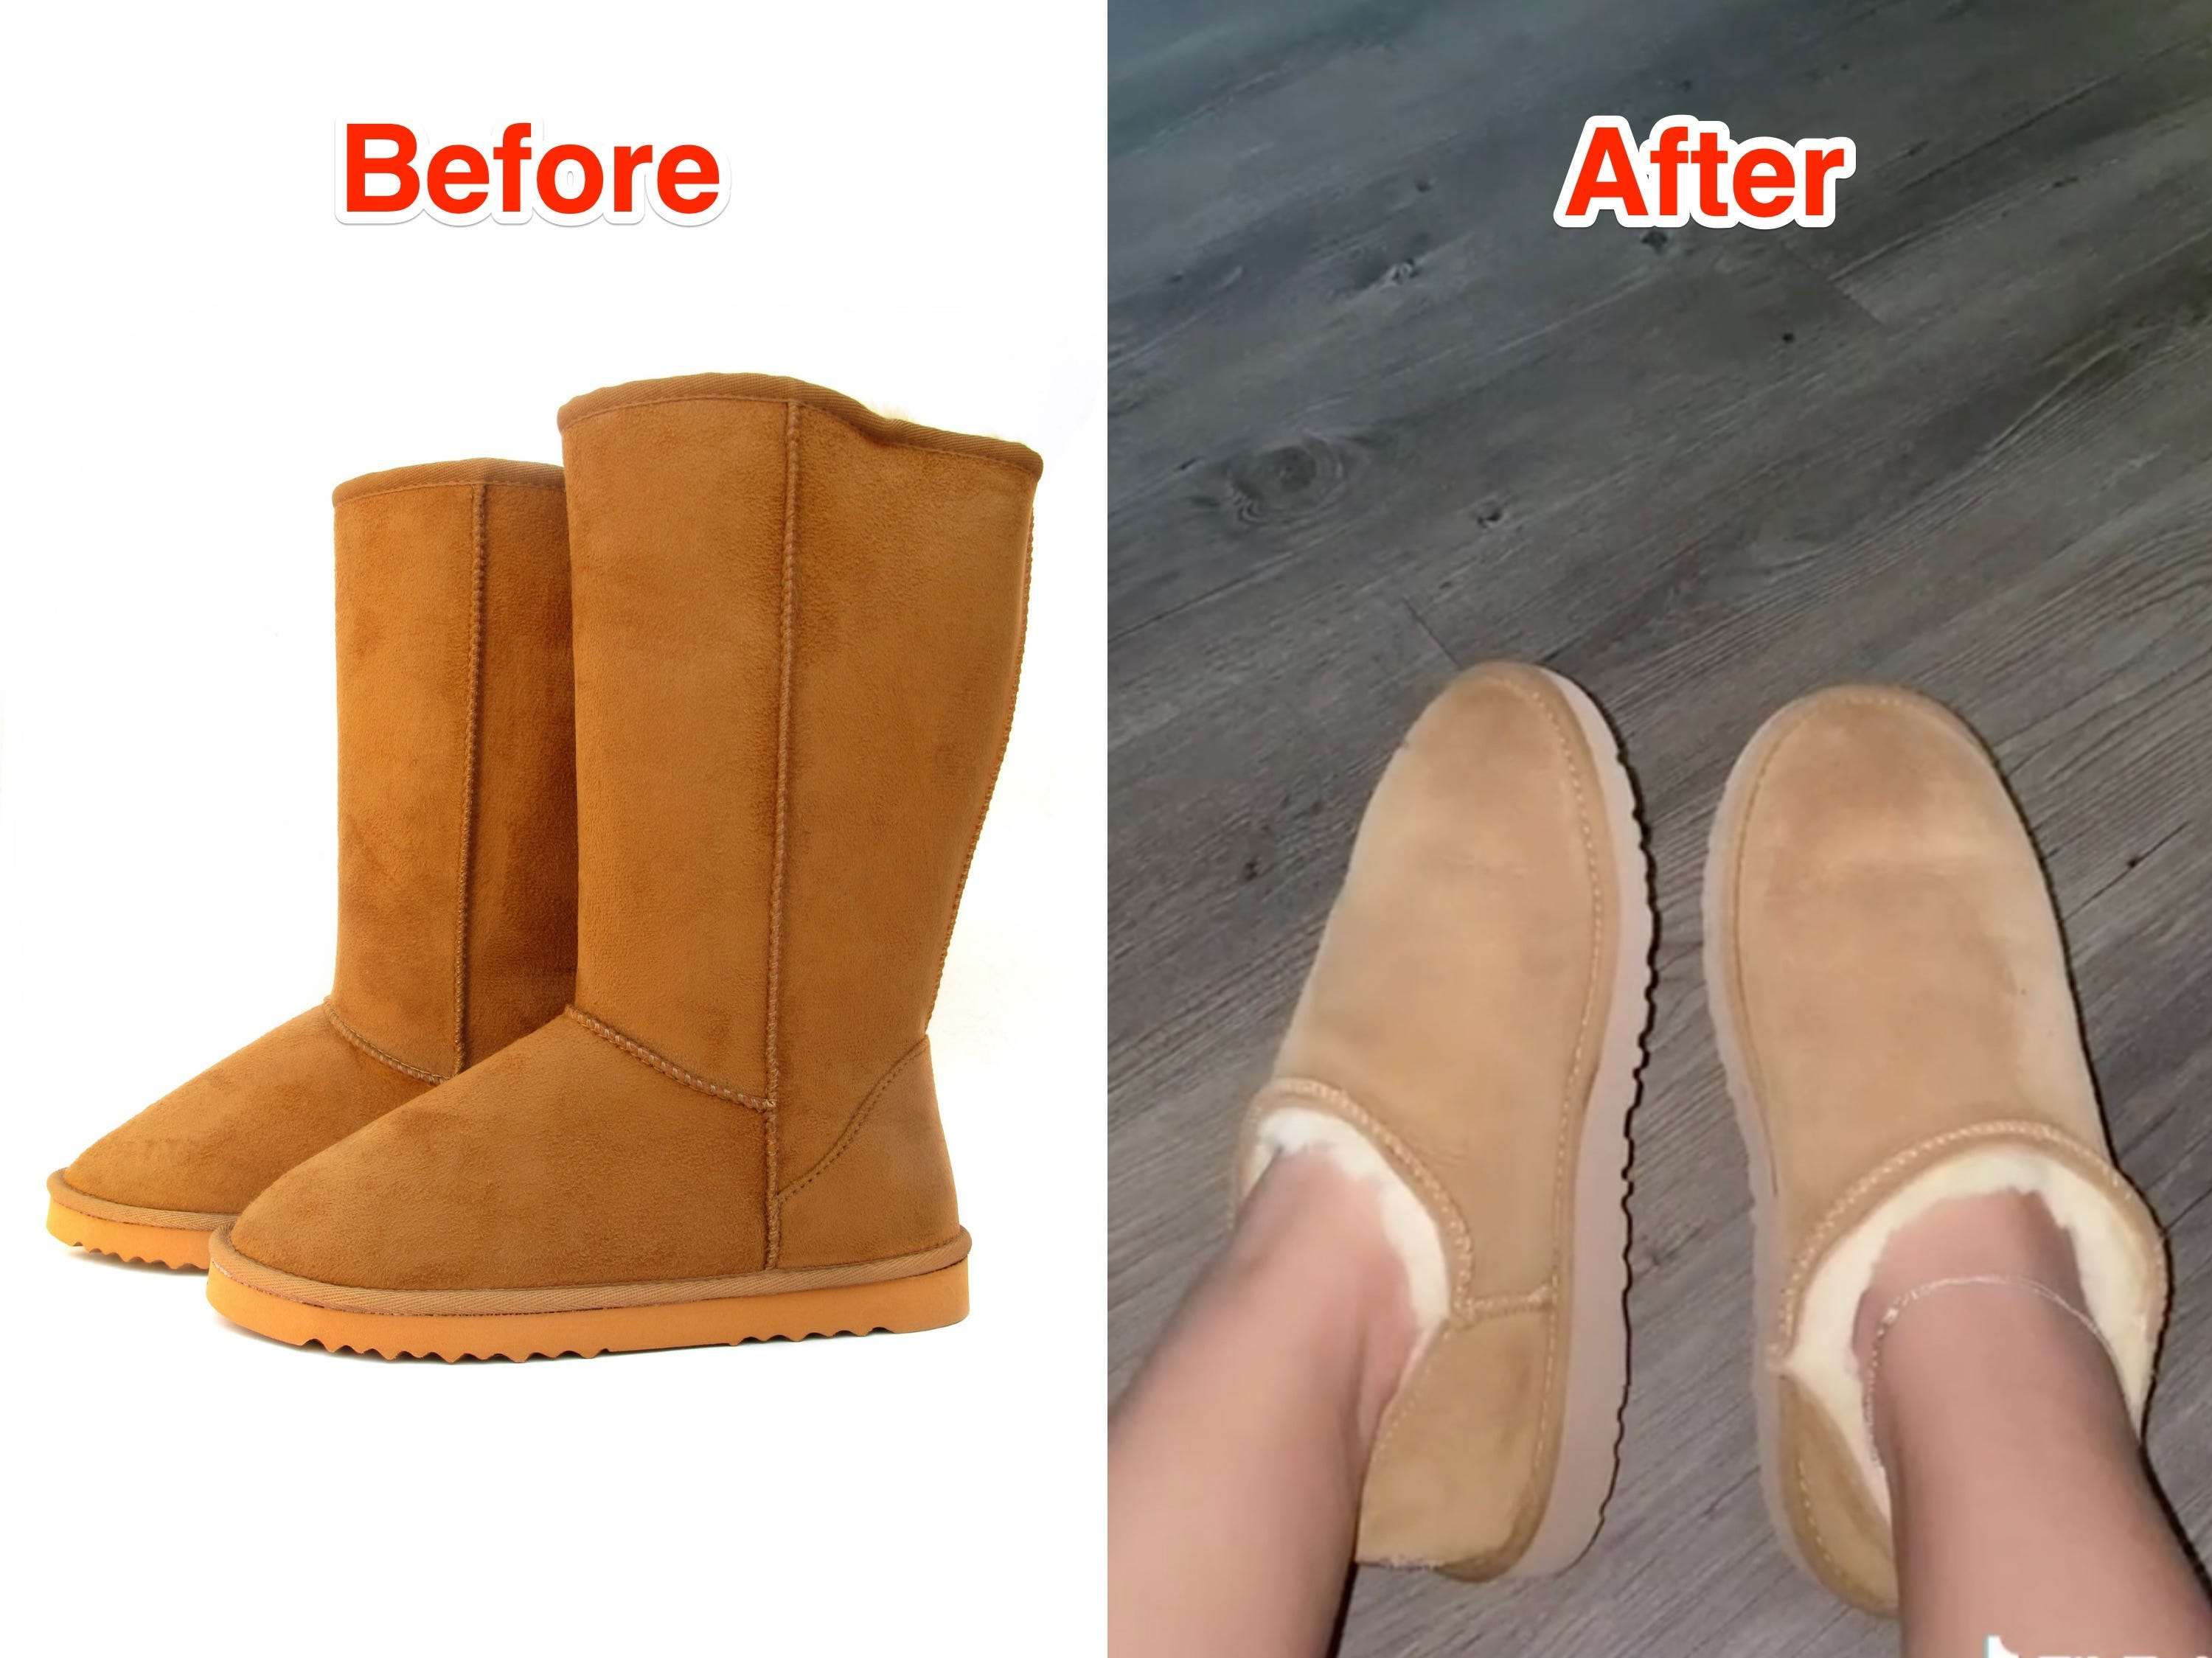 cutting their Ugg boots into slippers